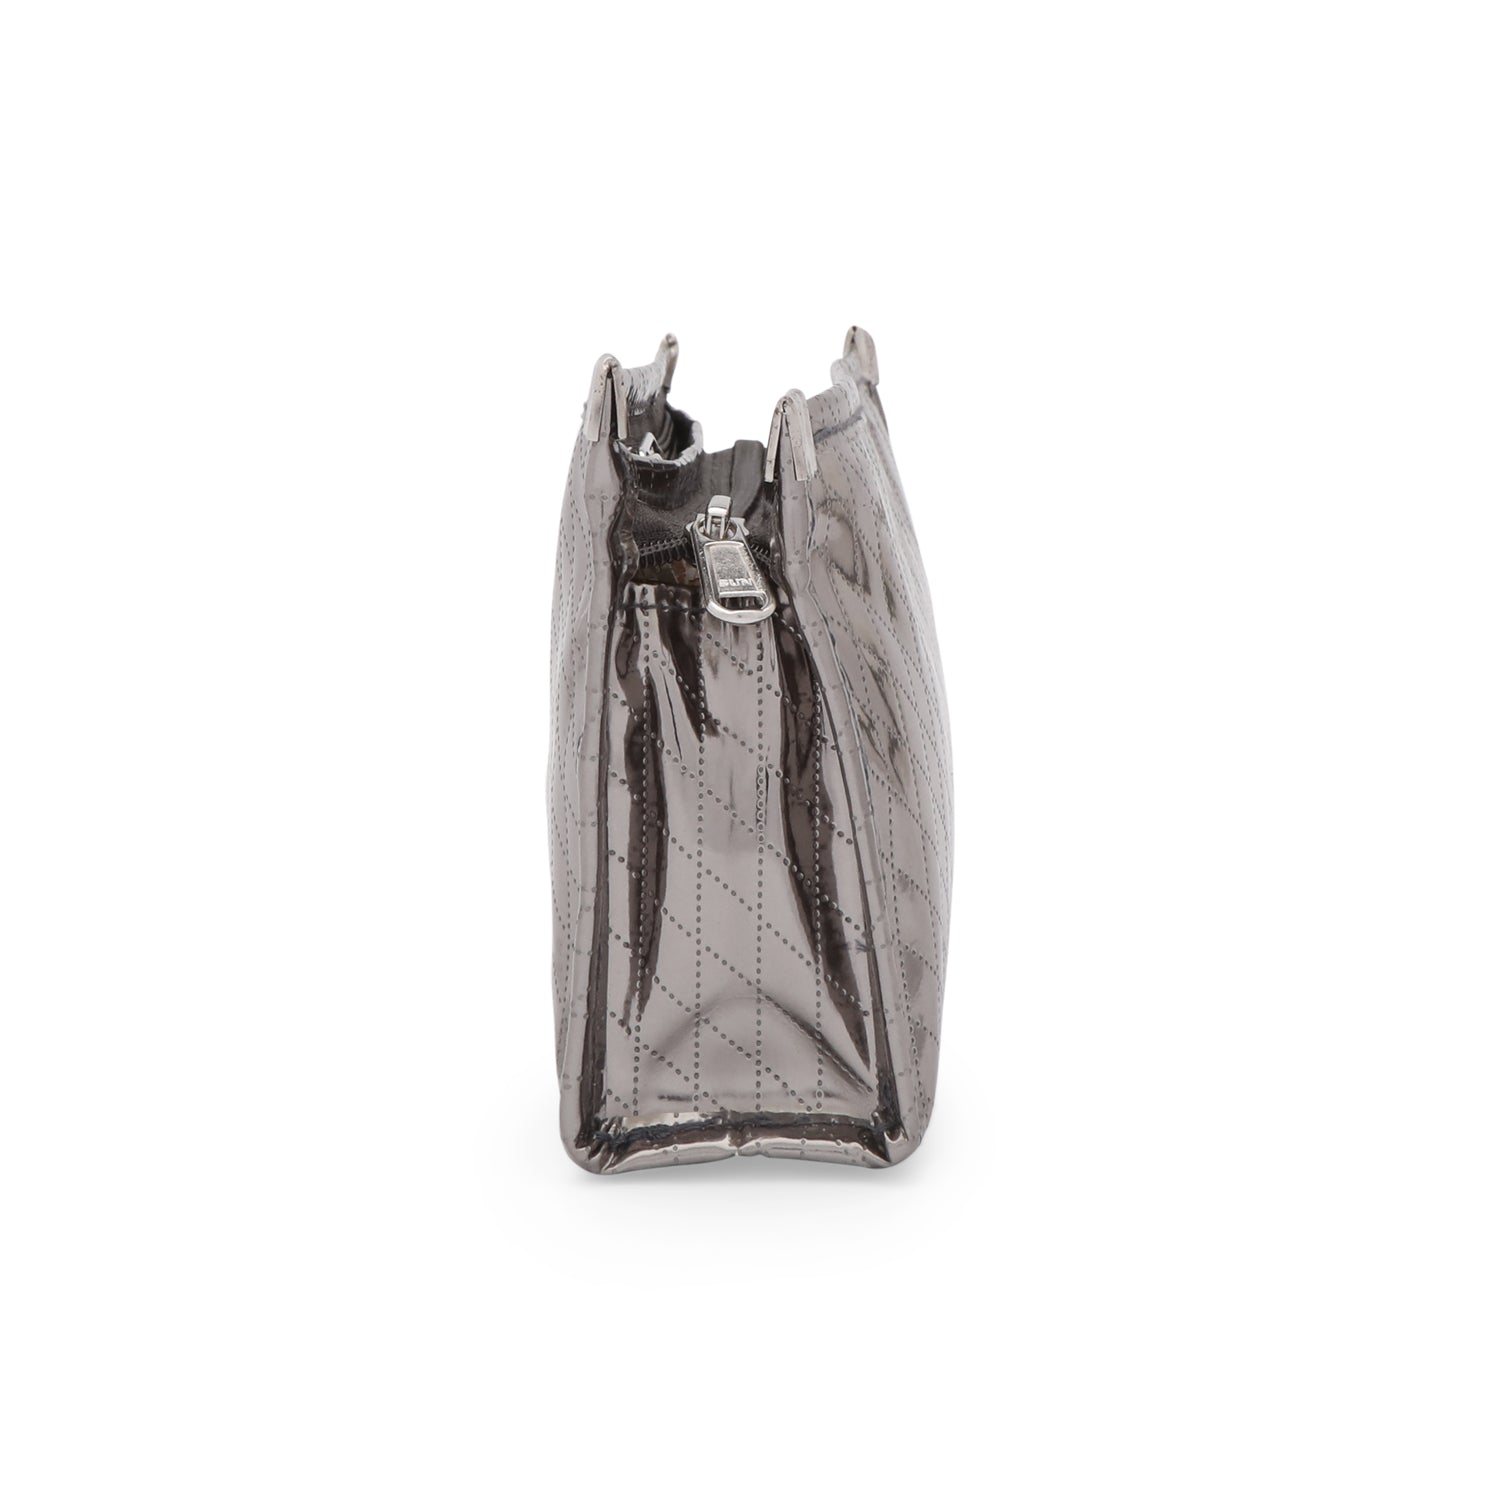 Travel Pouch - Silver 3 Pockets Pouch - Set of 3 Pouches